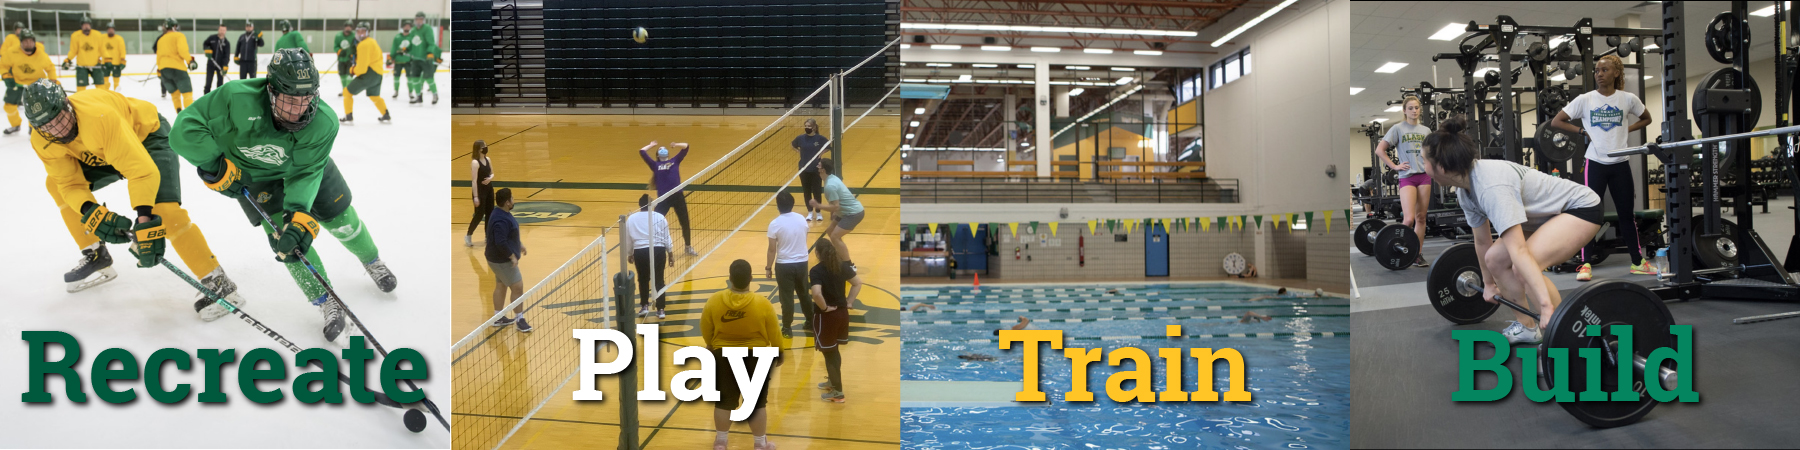 Recreation and Intramural - Fitness Center - City Tech